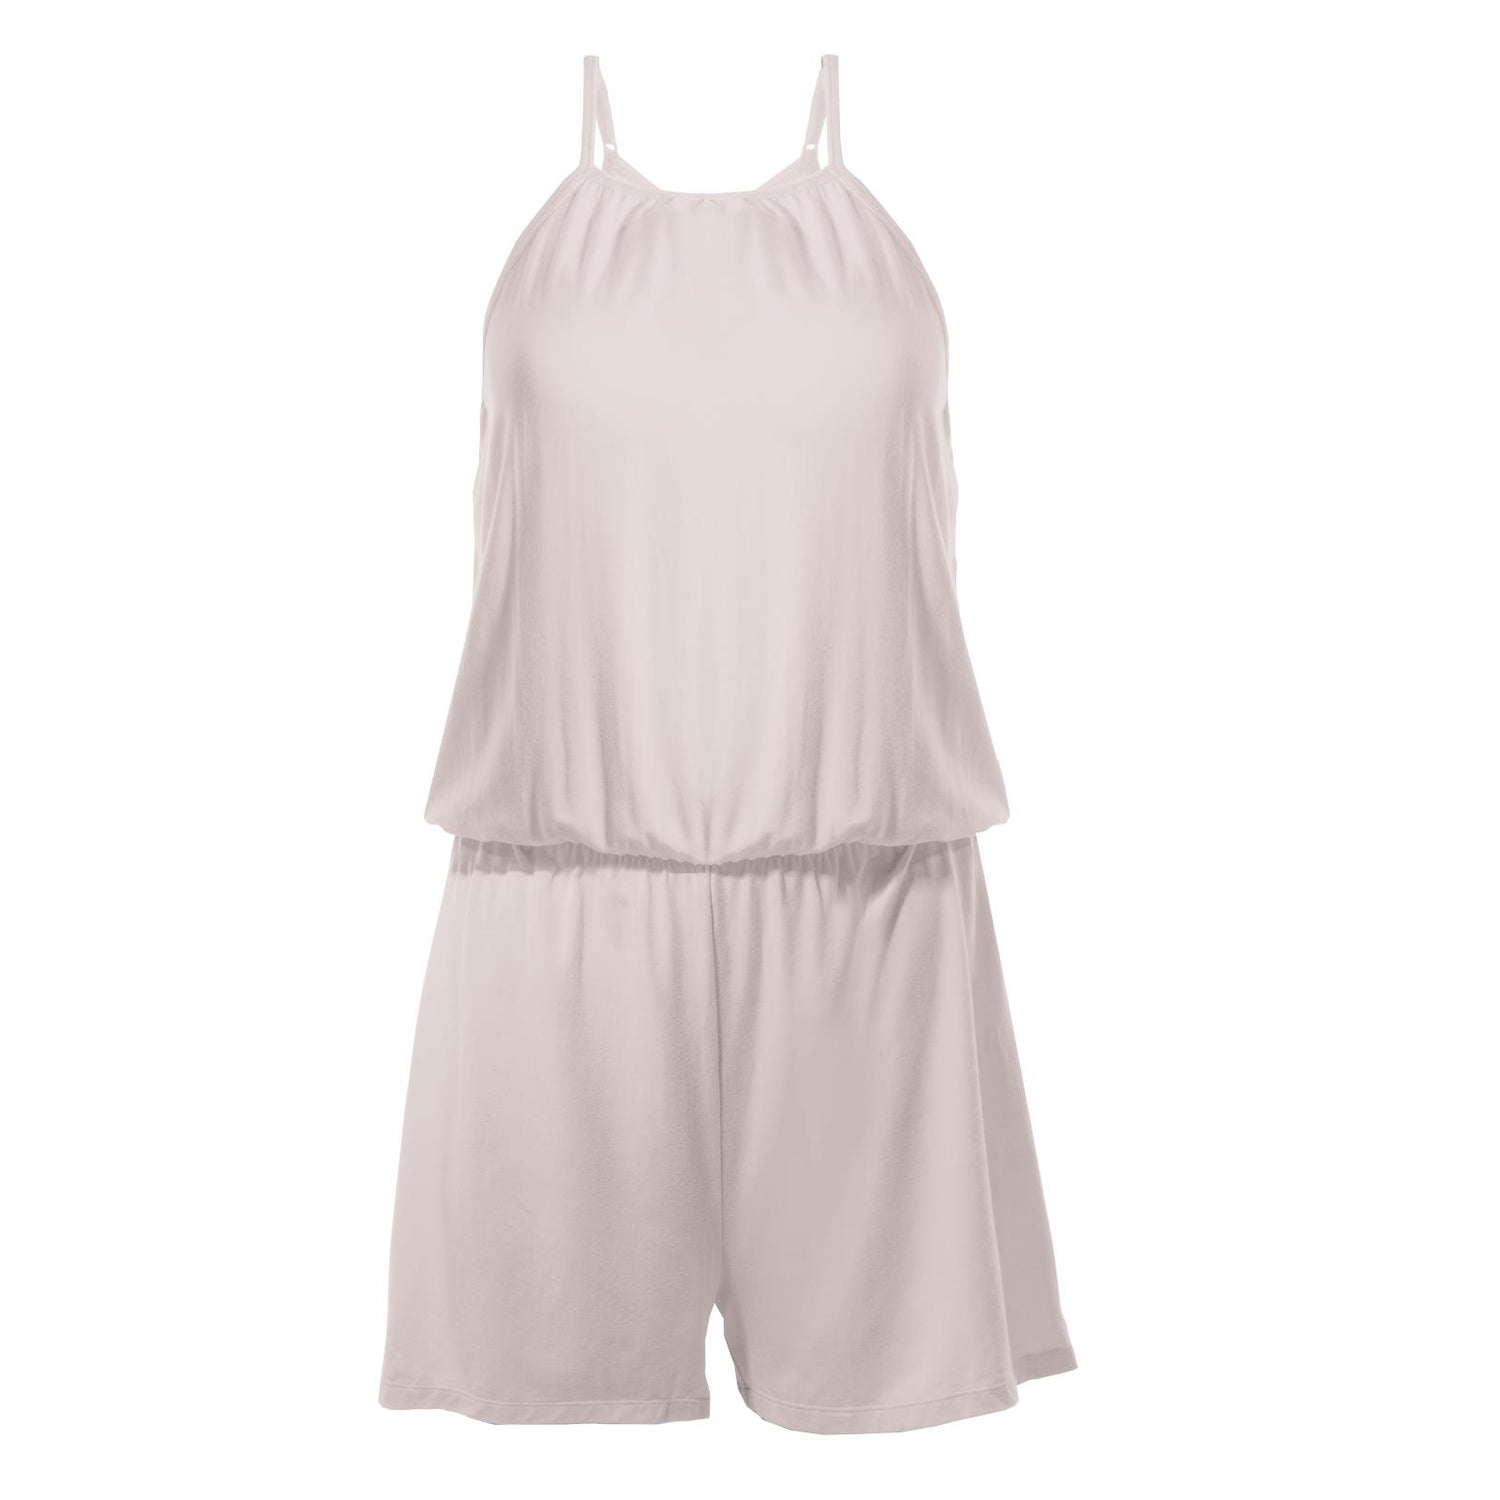 Women's Solid Keyhole Romper in Baby Rose